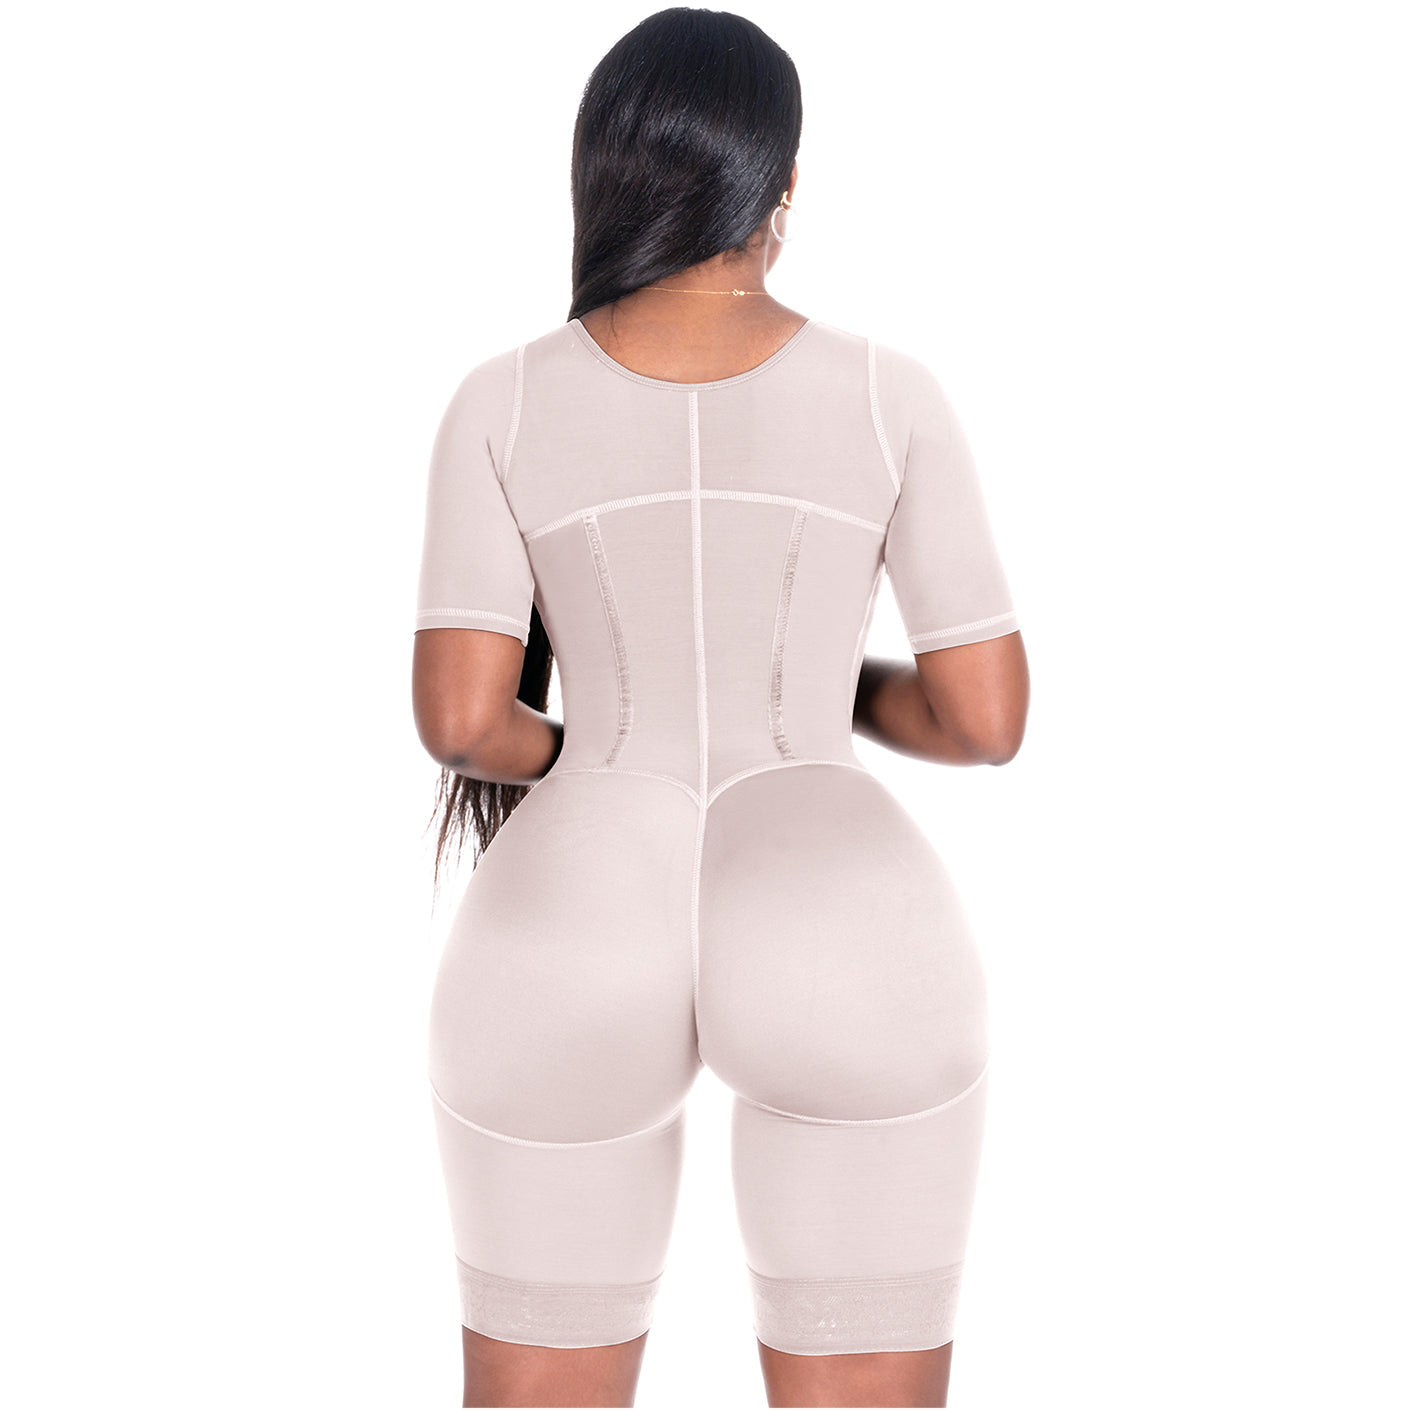 Bling Shapers 938BF Compression Garment With Sleeves and Built-in Bra